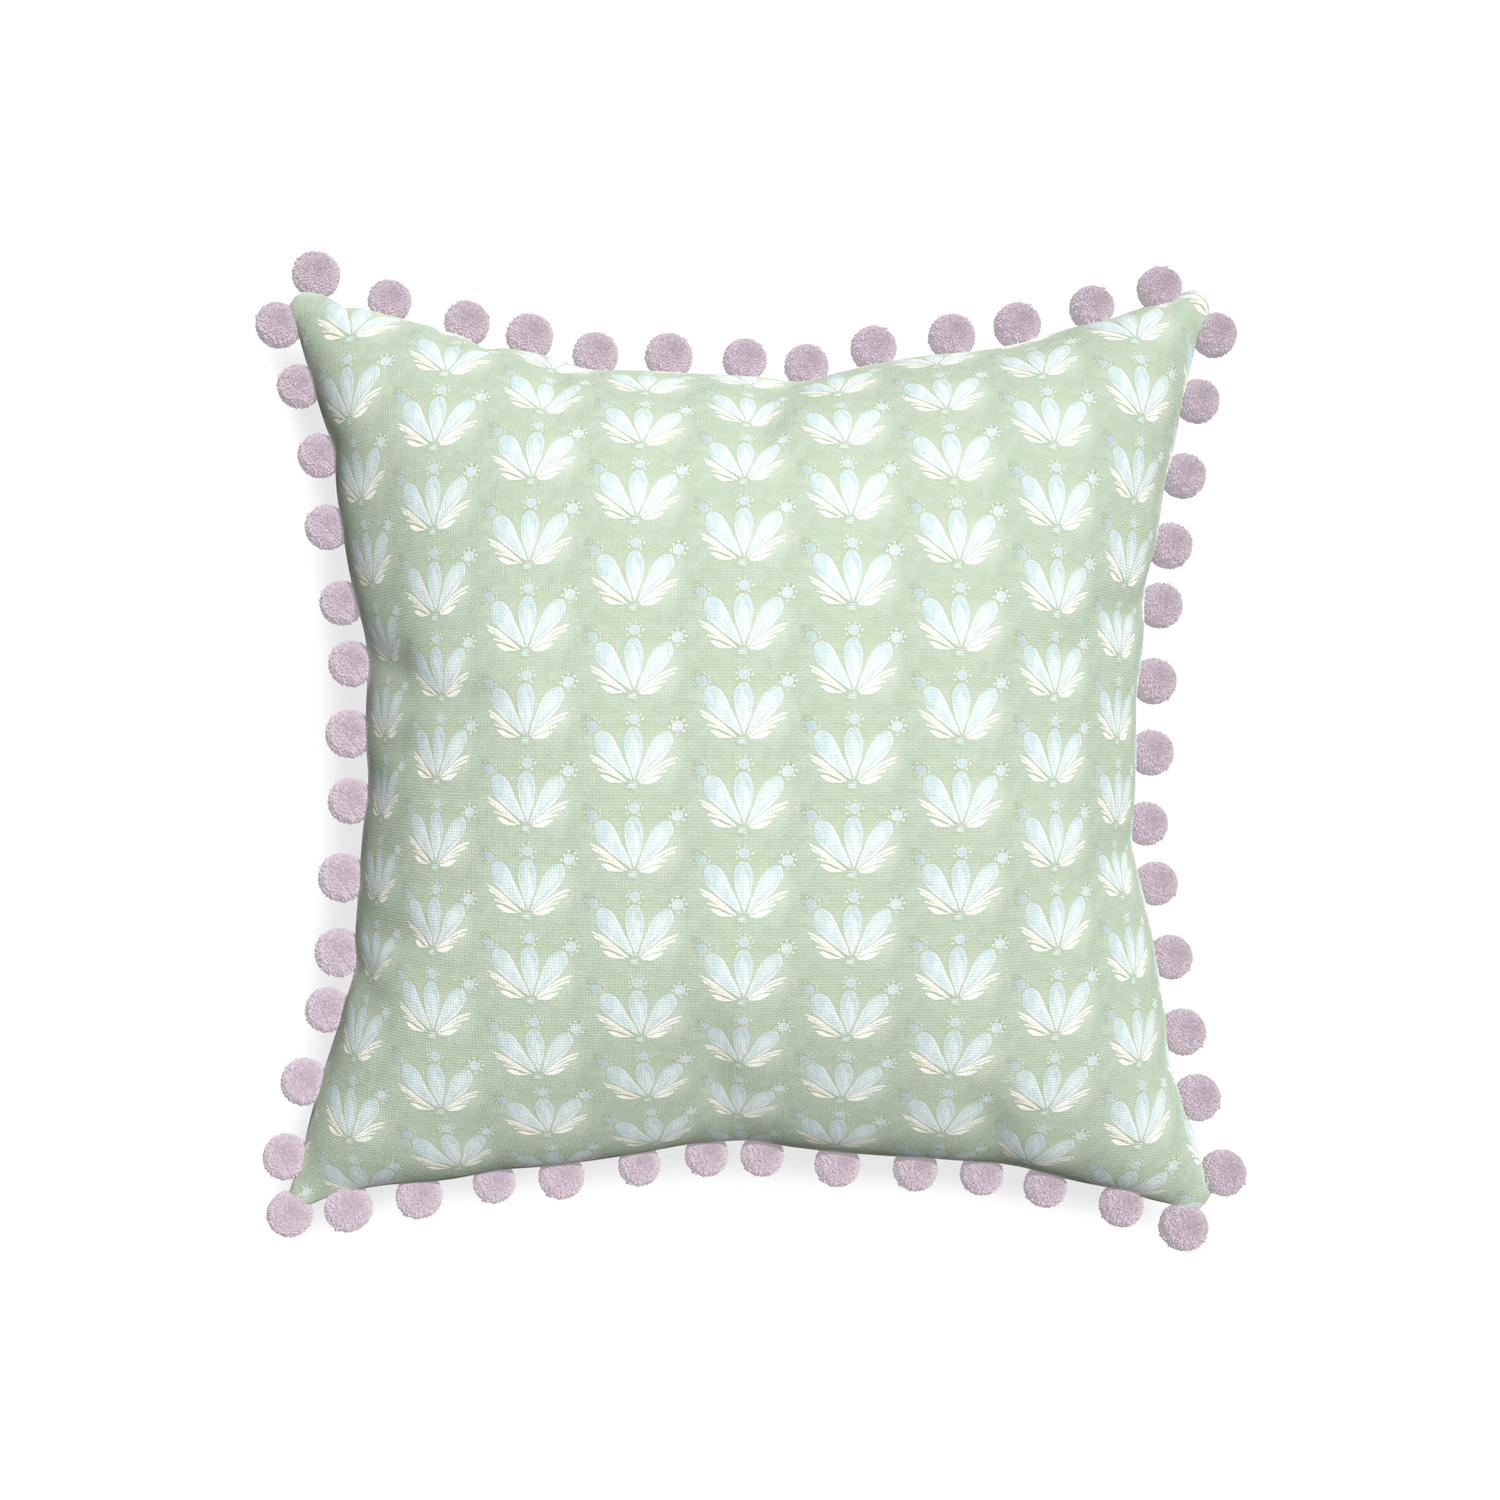 20-square serena sea salt custom blue & green floral drop repeatpillow with l on white background